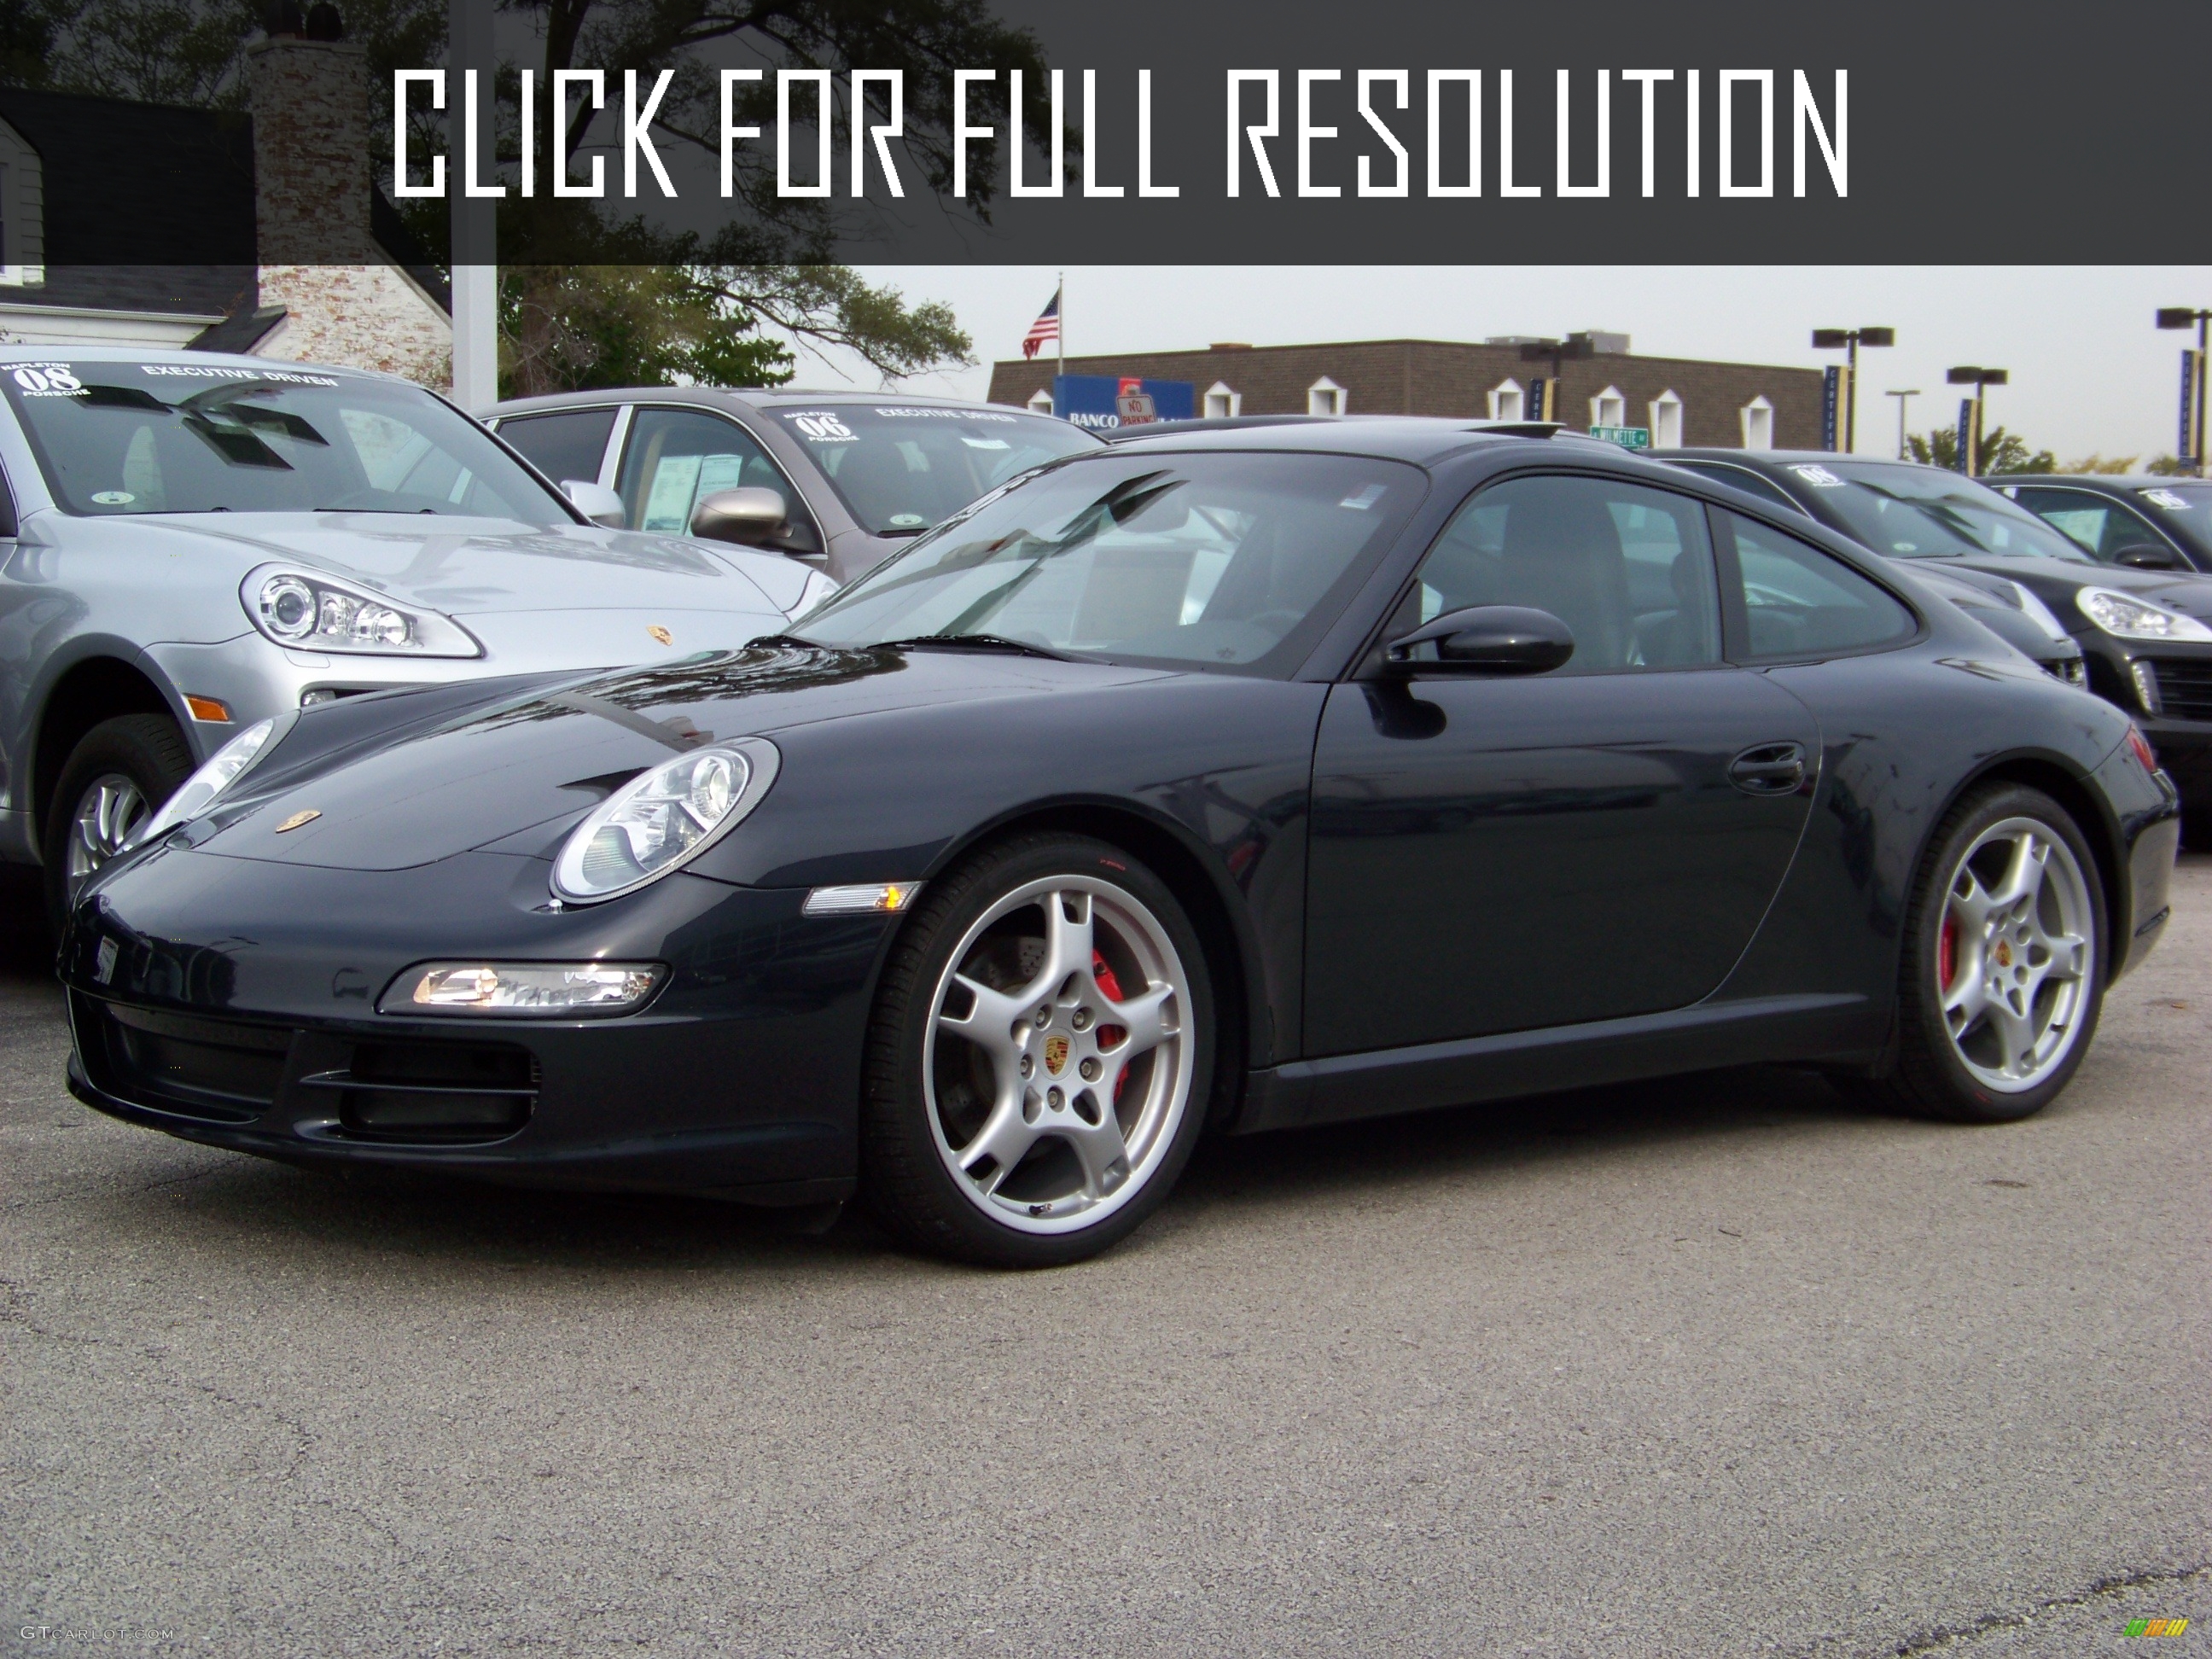 06 Porsche 911 Carrera Best Image Gallery 1 Share And Download